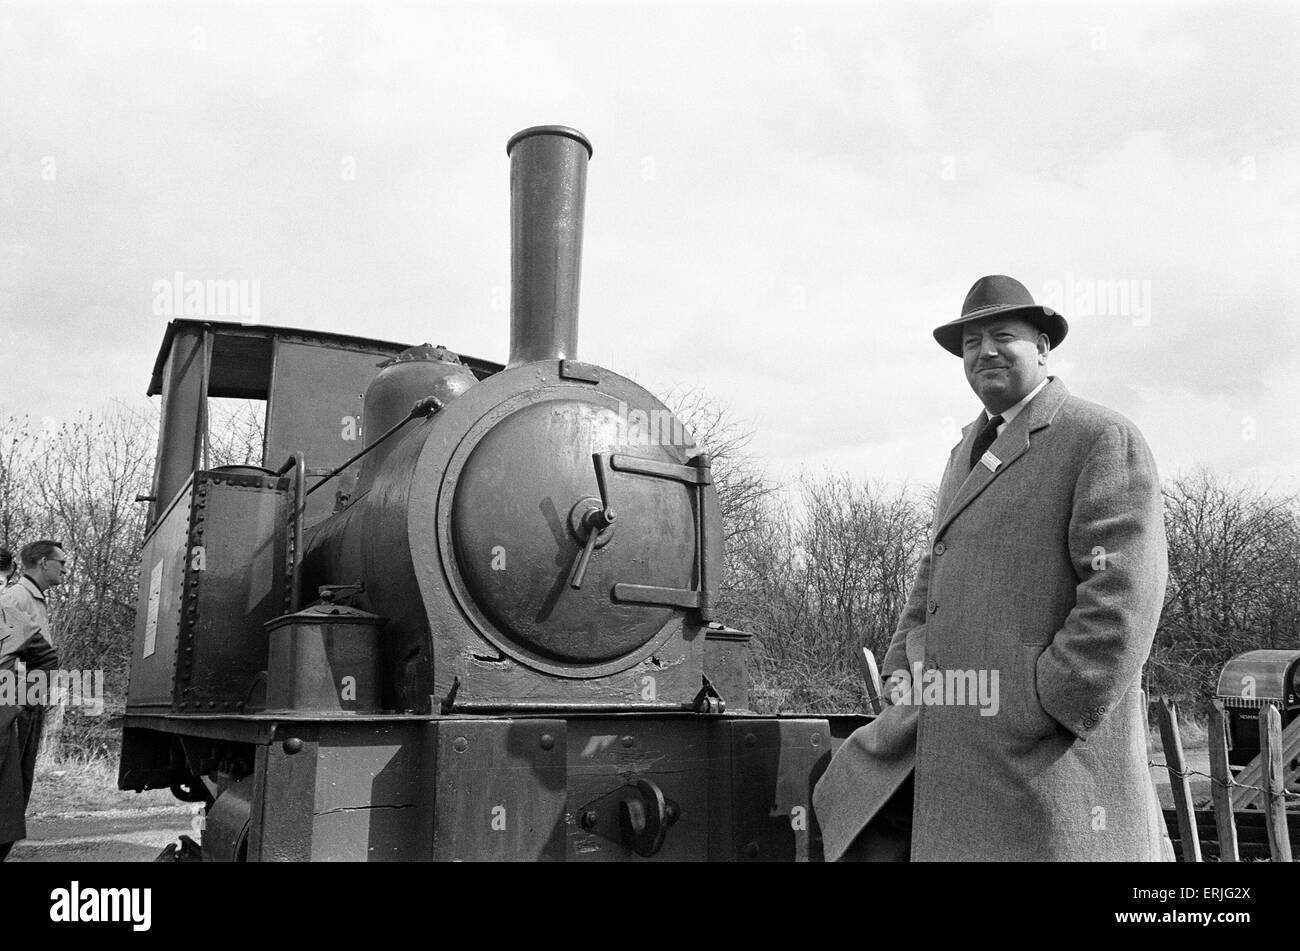 Dr Richard Beeching, Chairman of British Railways, Photo-call visiting the Bluebell Line in Sussex, England, 1st April 1962. He became a household name in Britain in the early 1960s for his report 'The Reshaping of British Railways', commonly referred to as 'The Beeching Report', which led to far- reaching changes in the railway network, popularly known as the Beeching Axe. Source Wikipedia. Stock Photo